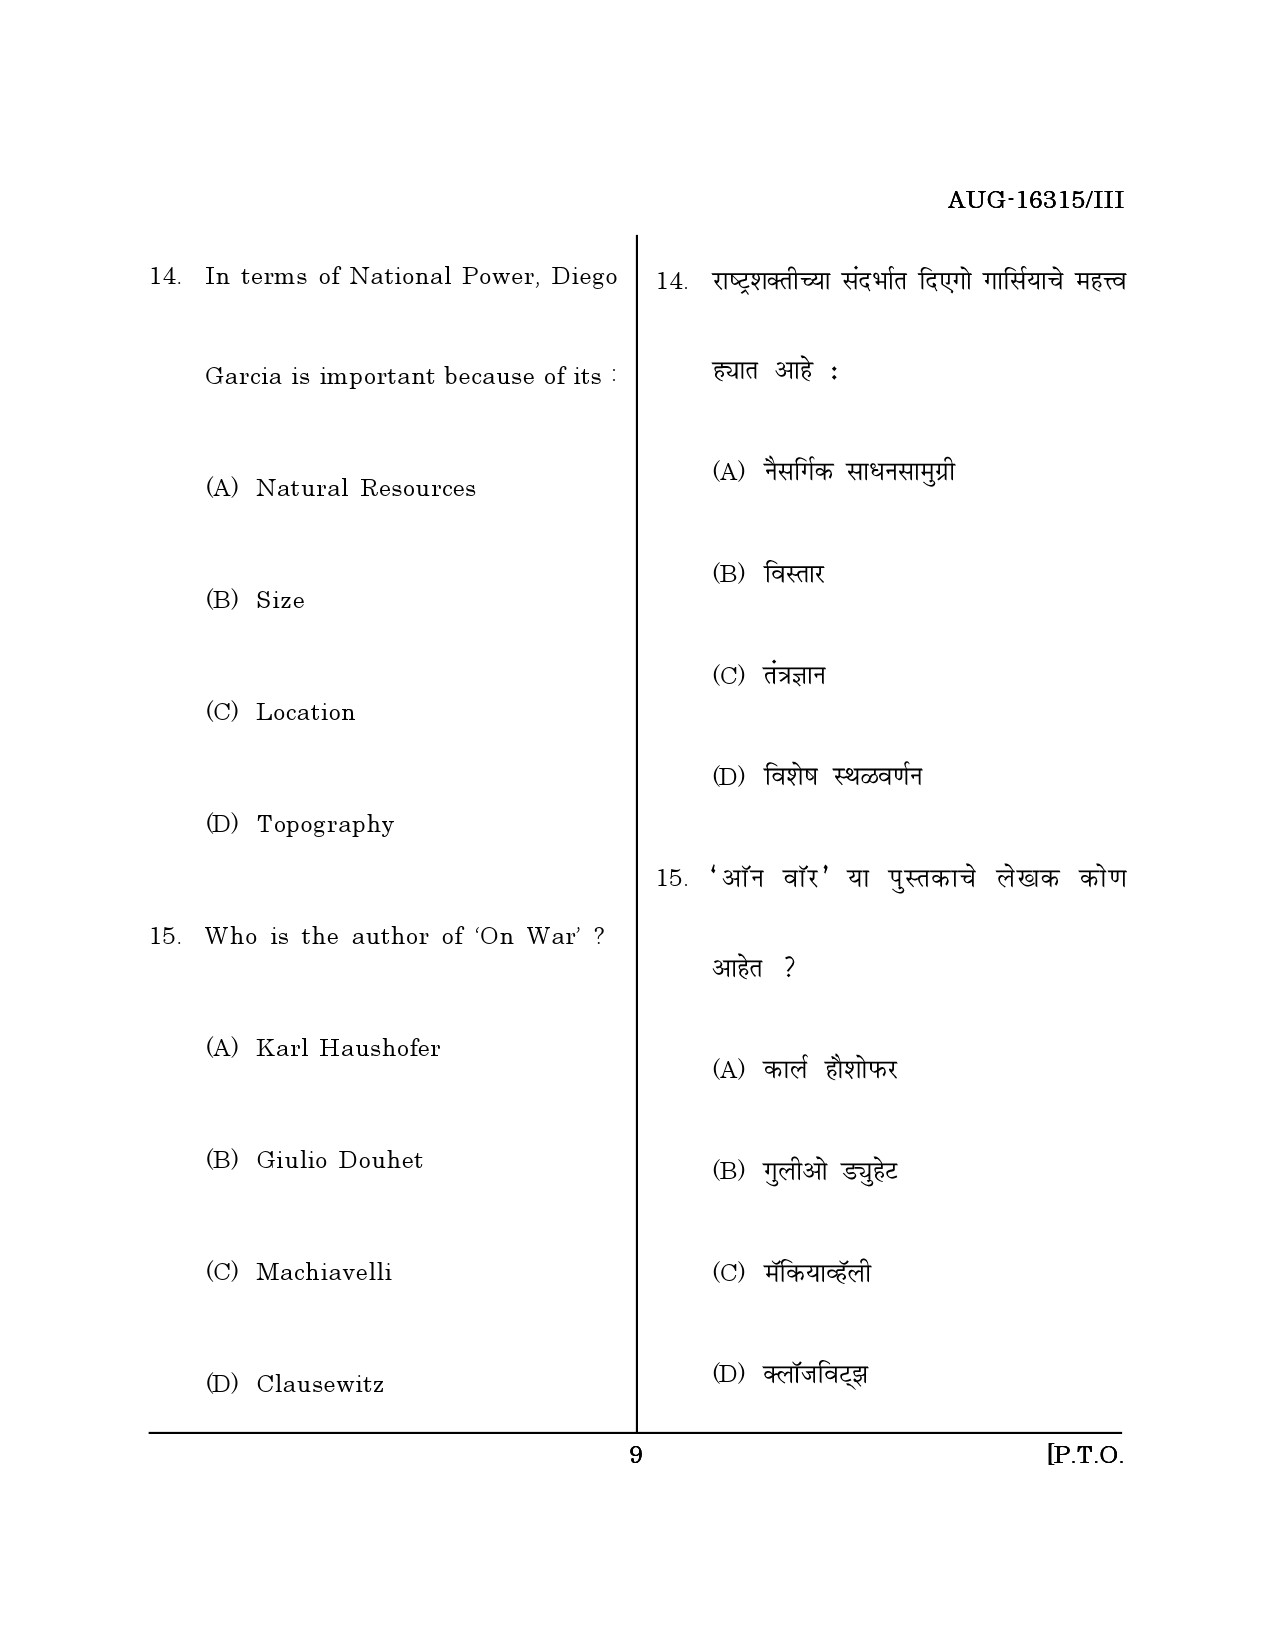 Maharashtra SET Defence and Strategic Studies Question Paper III August 2015 8